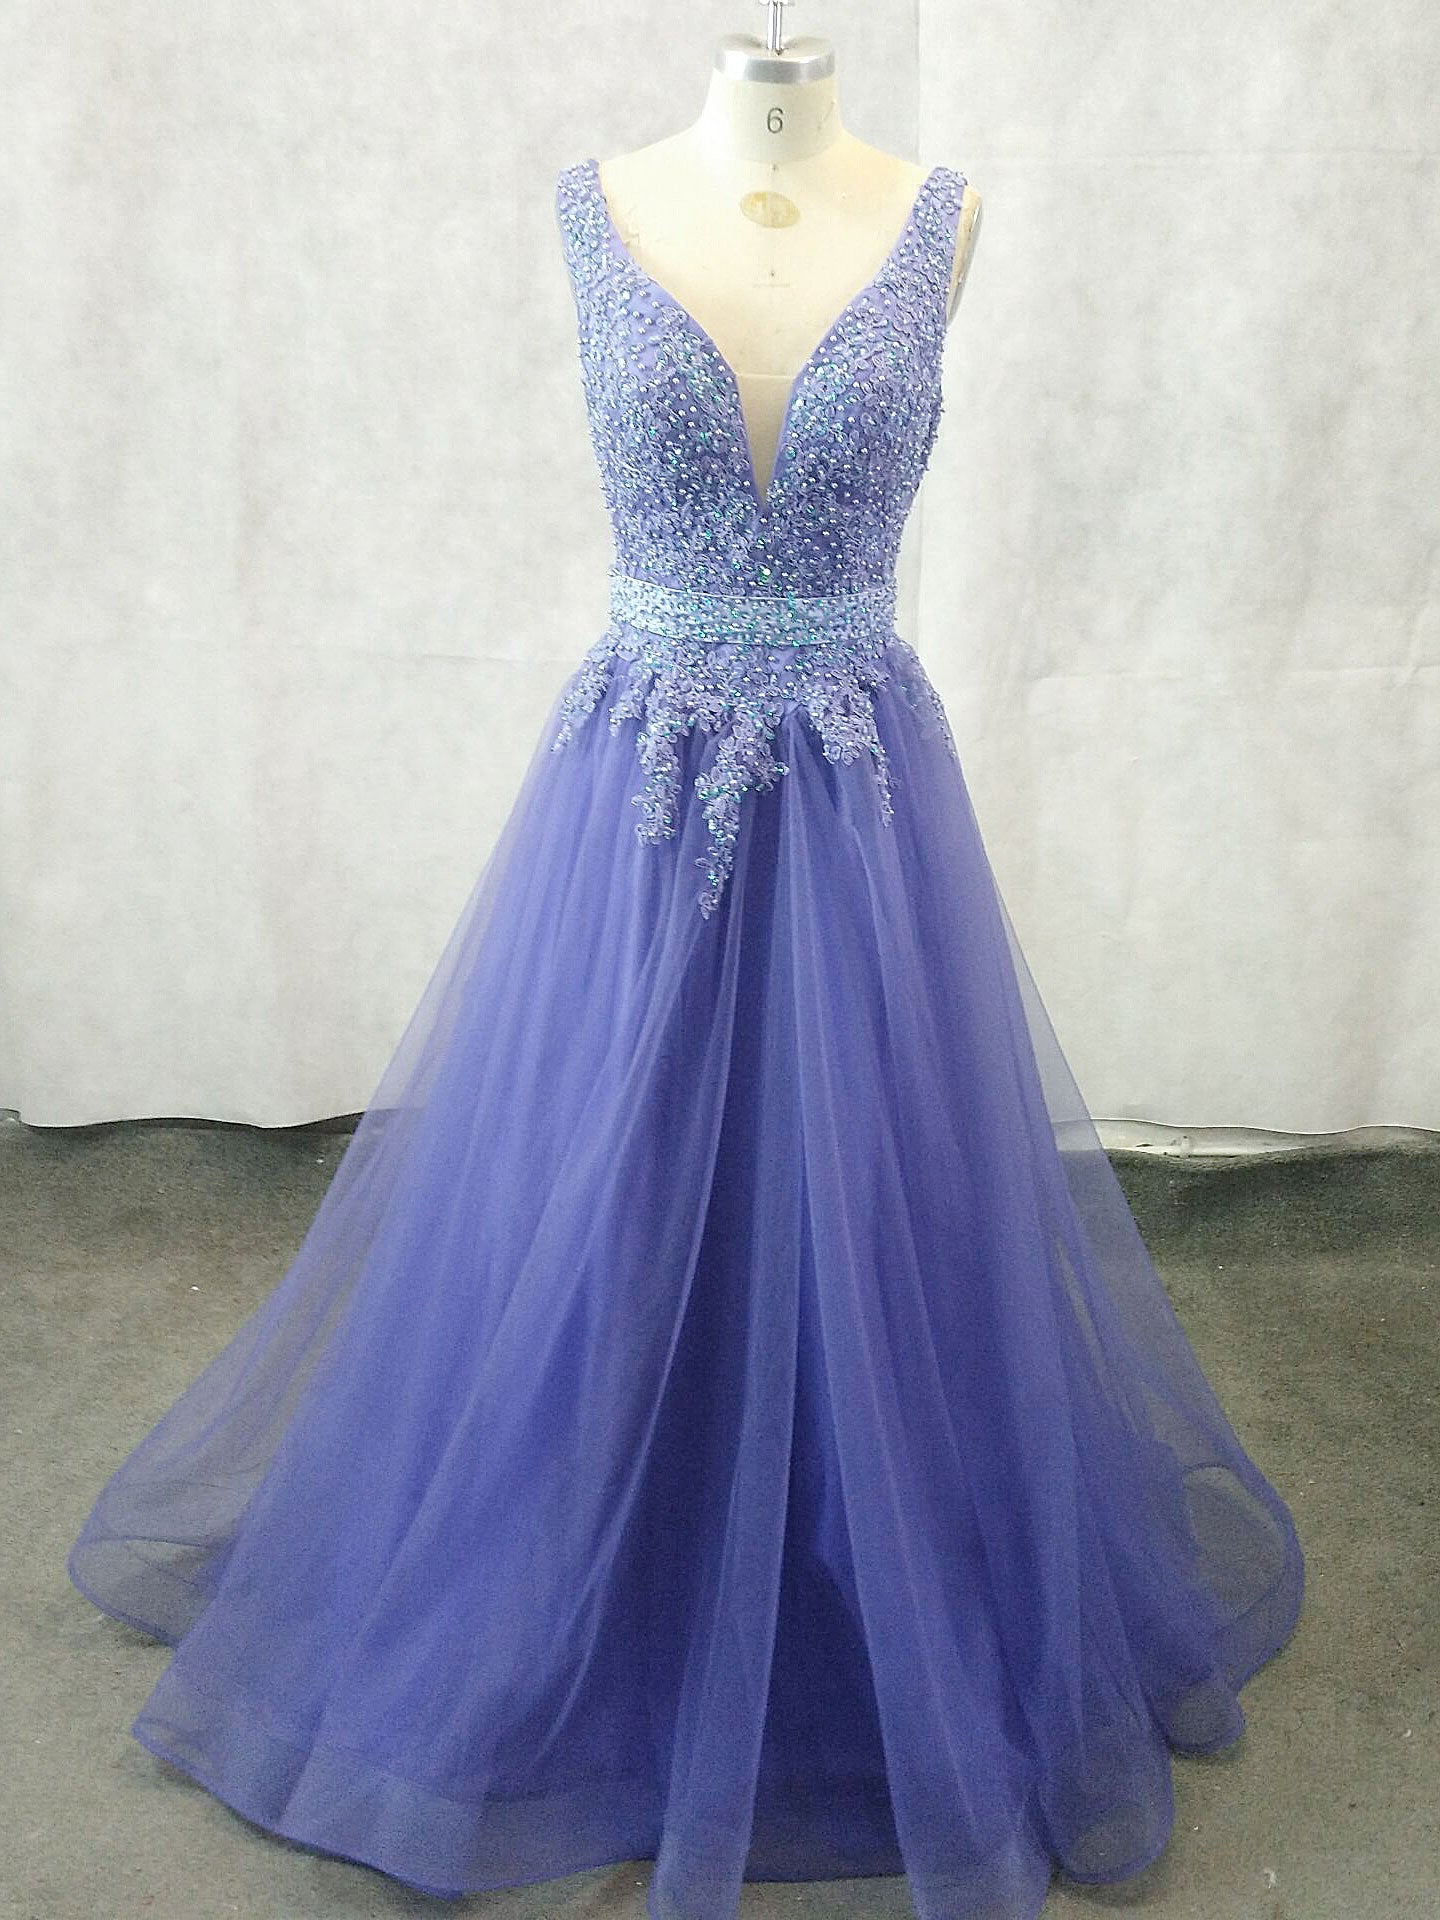 Unique V Neck Tulle Lace Applique Long Prom Dress Outfits For Girls, Tulle Evening Dress